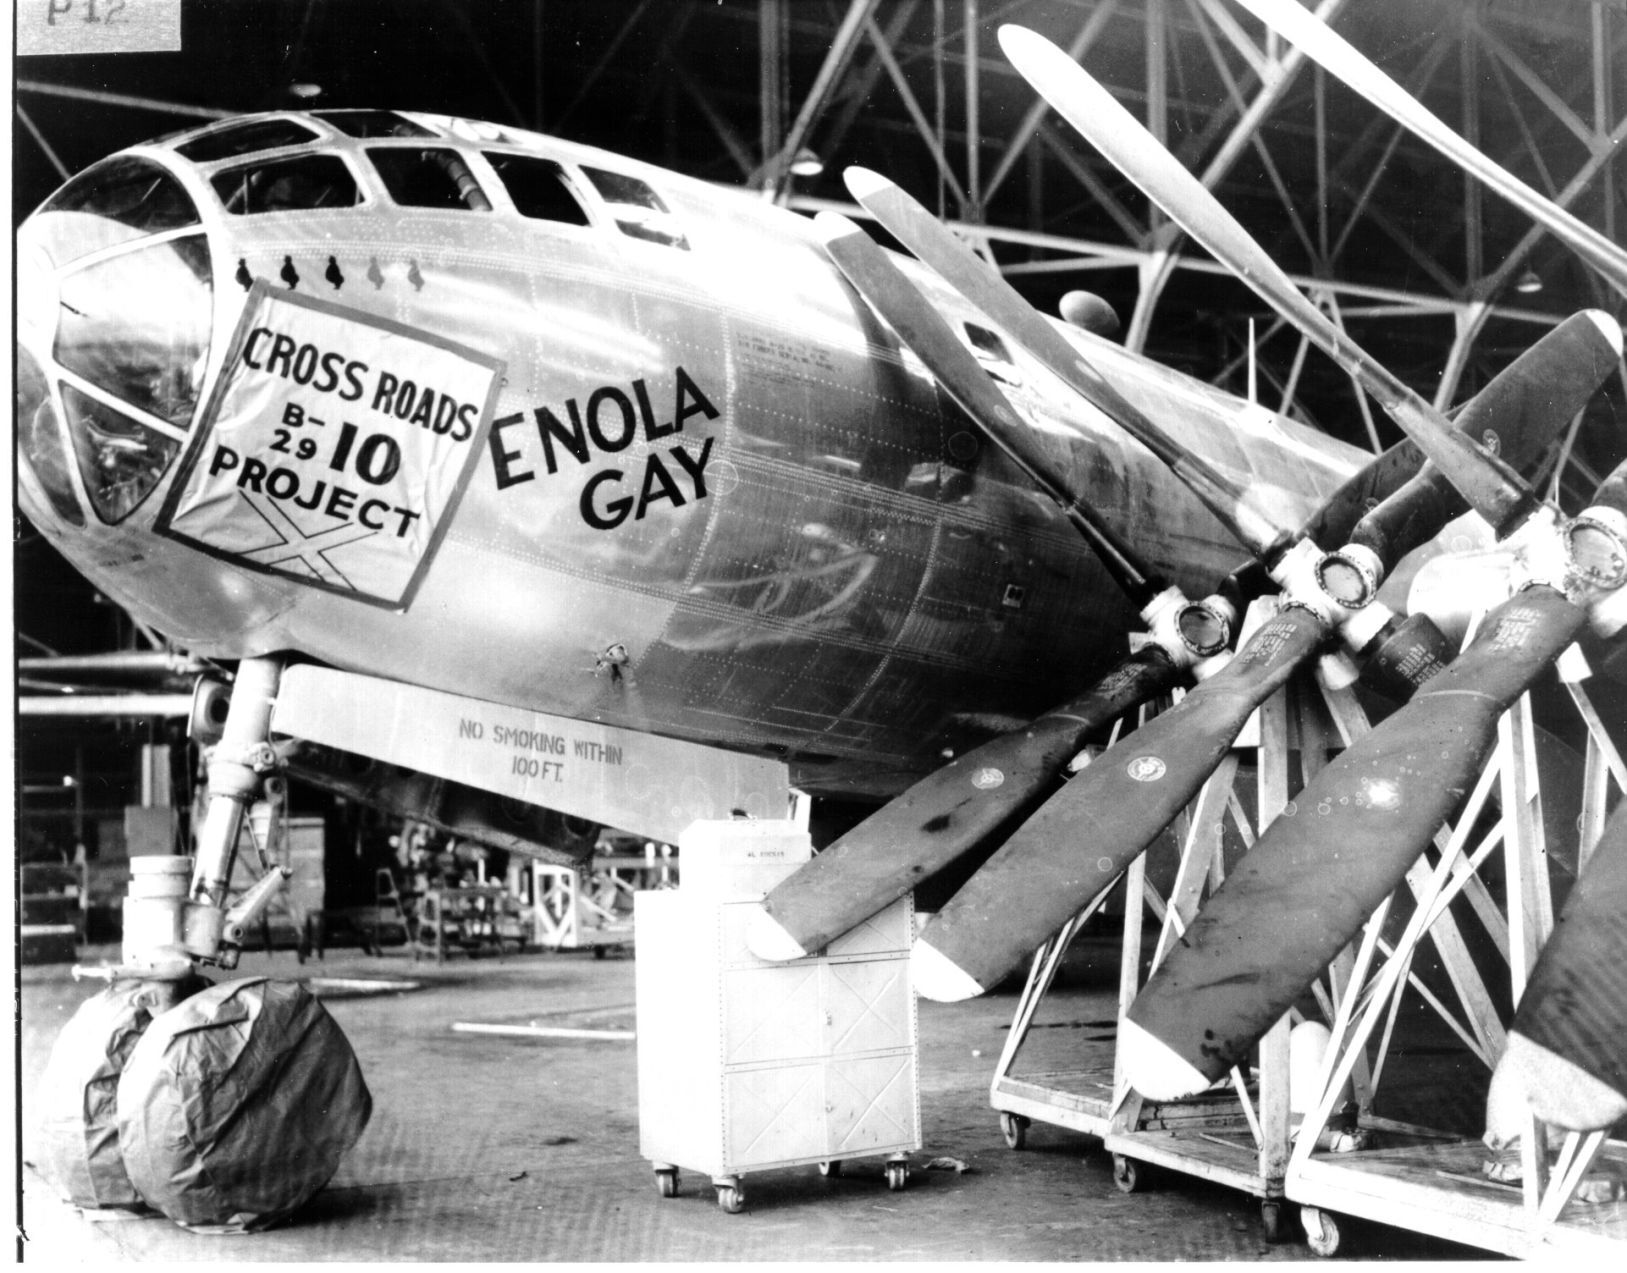 crew of enola gay subsequent history